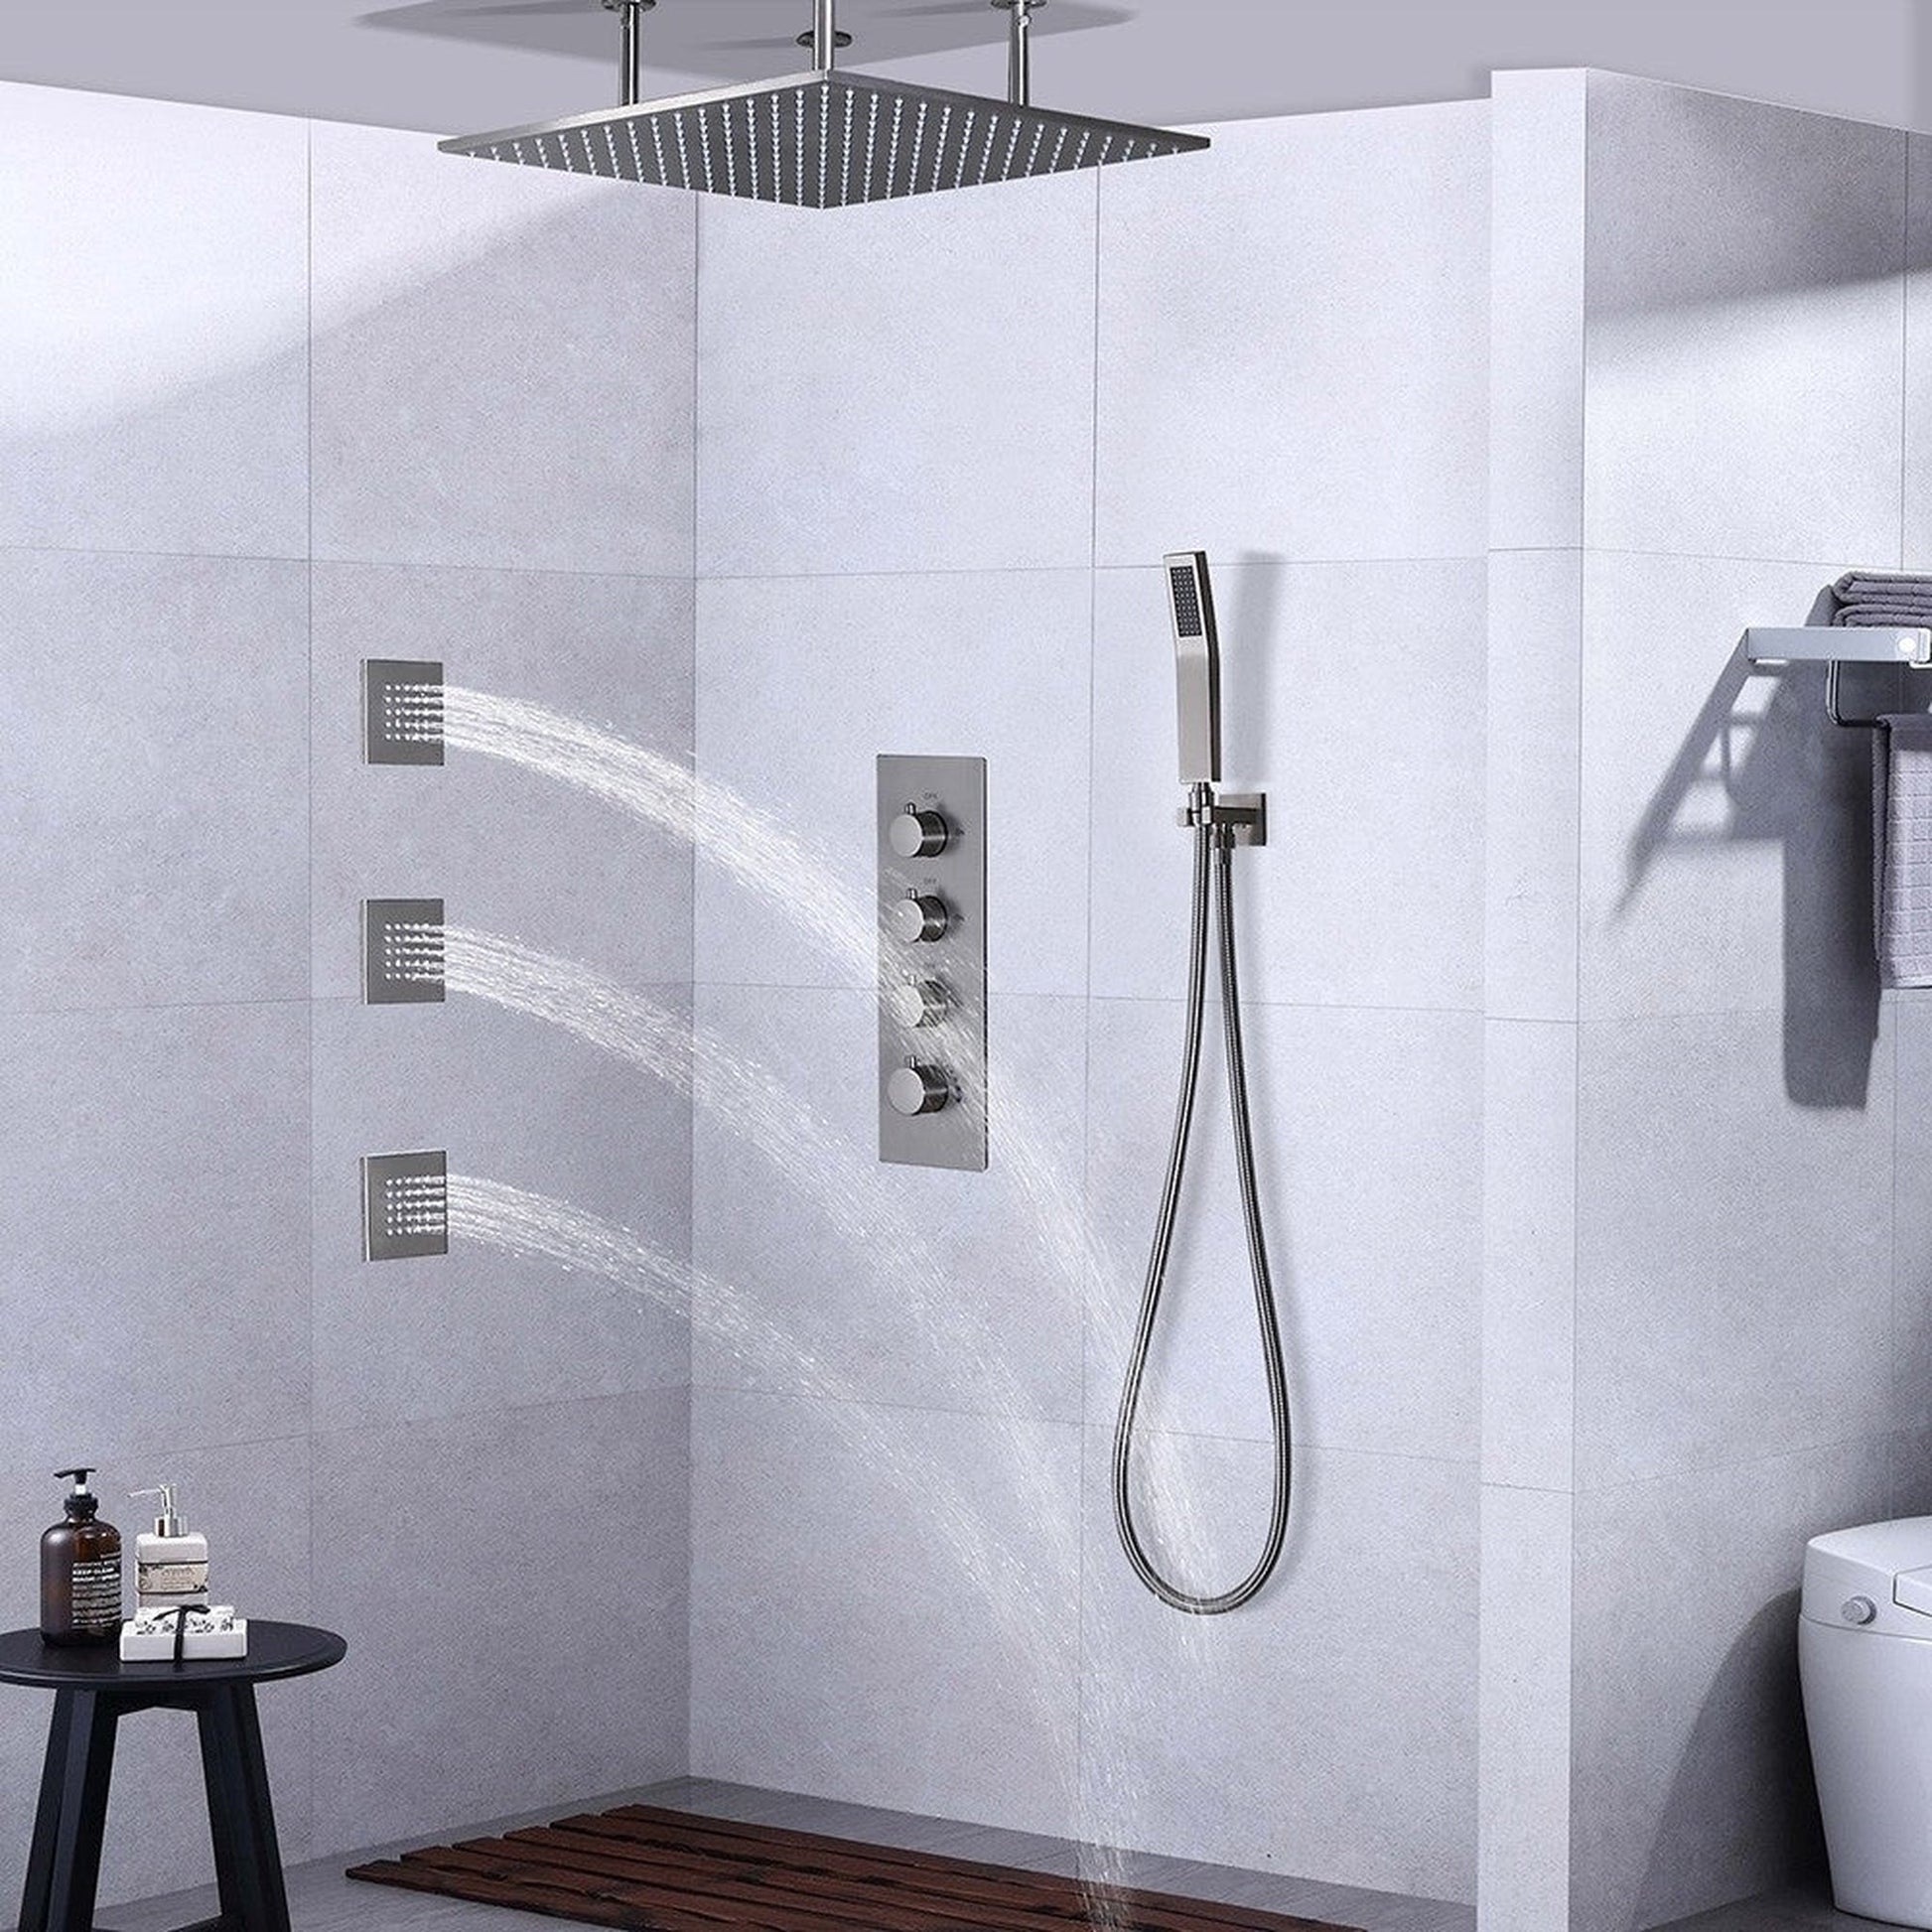 Fontana 20" x 20" Brushed Nickel Ceiling Mounted Thermostatic Valve Shower System With 3-Jet Sprays, Hand Shower and Without Water Powered LED Lights